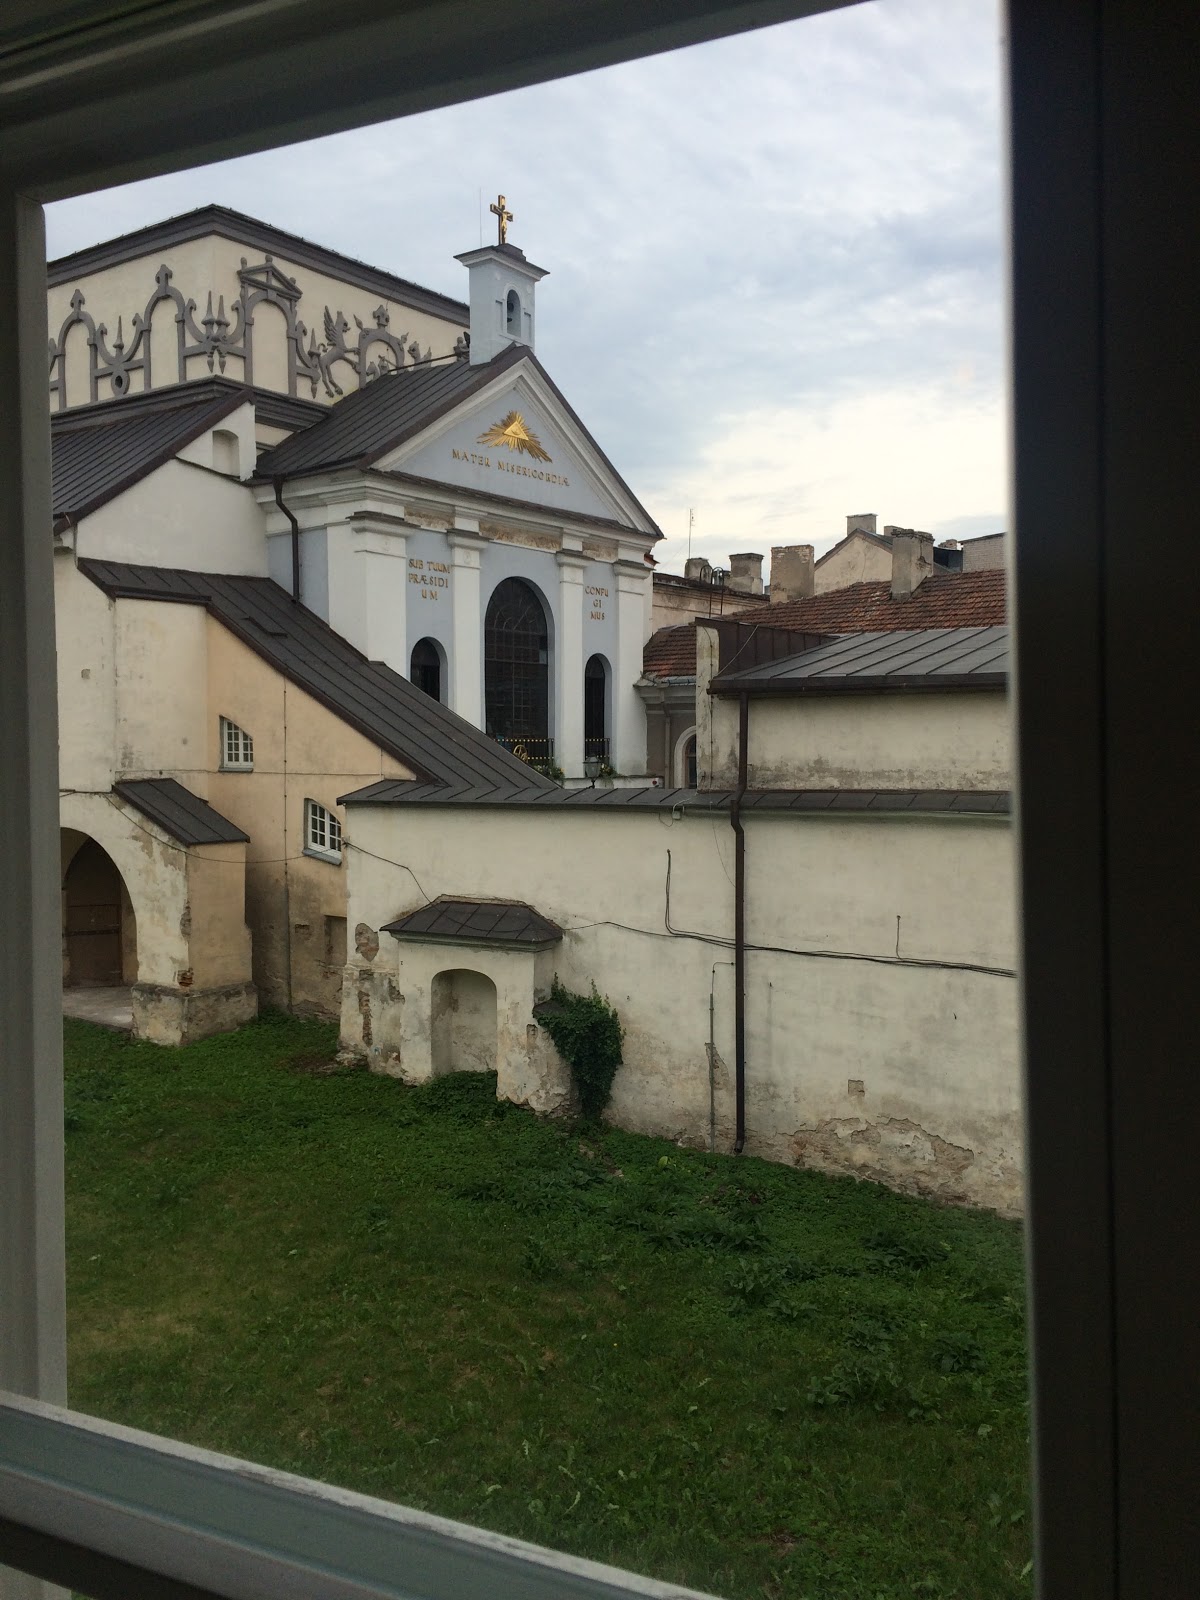 The view from our room at Domus Maria. Just behind this church is the "Gate of Dawn" which is one of the original gates of Old Vilnius.